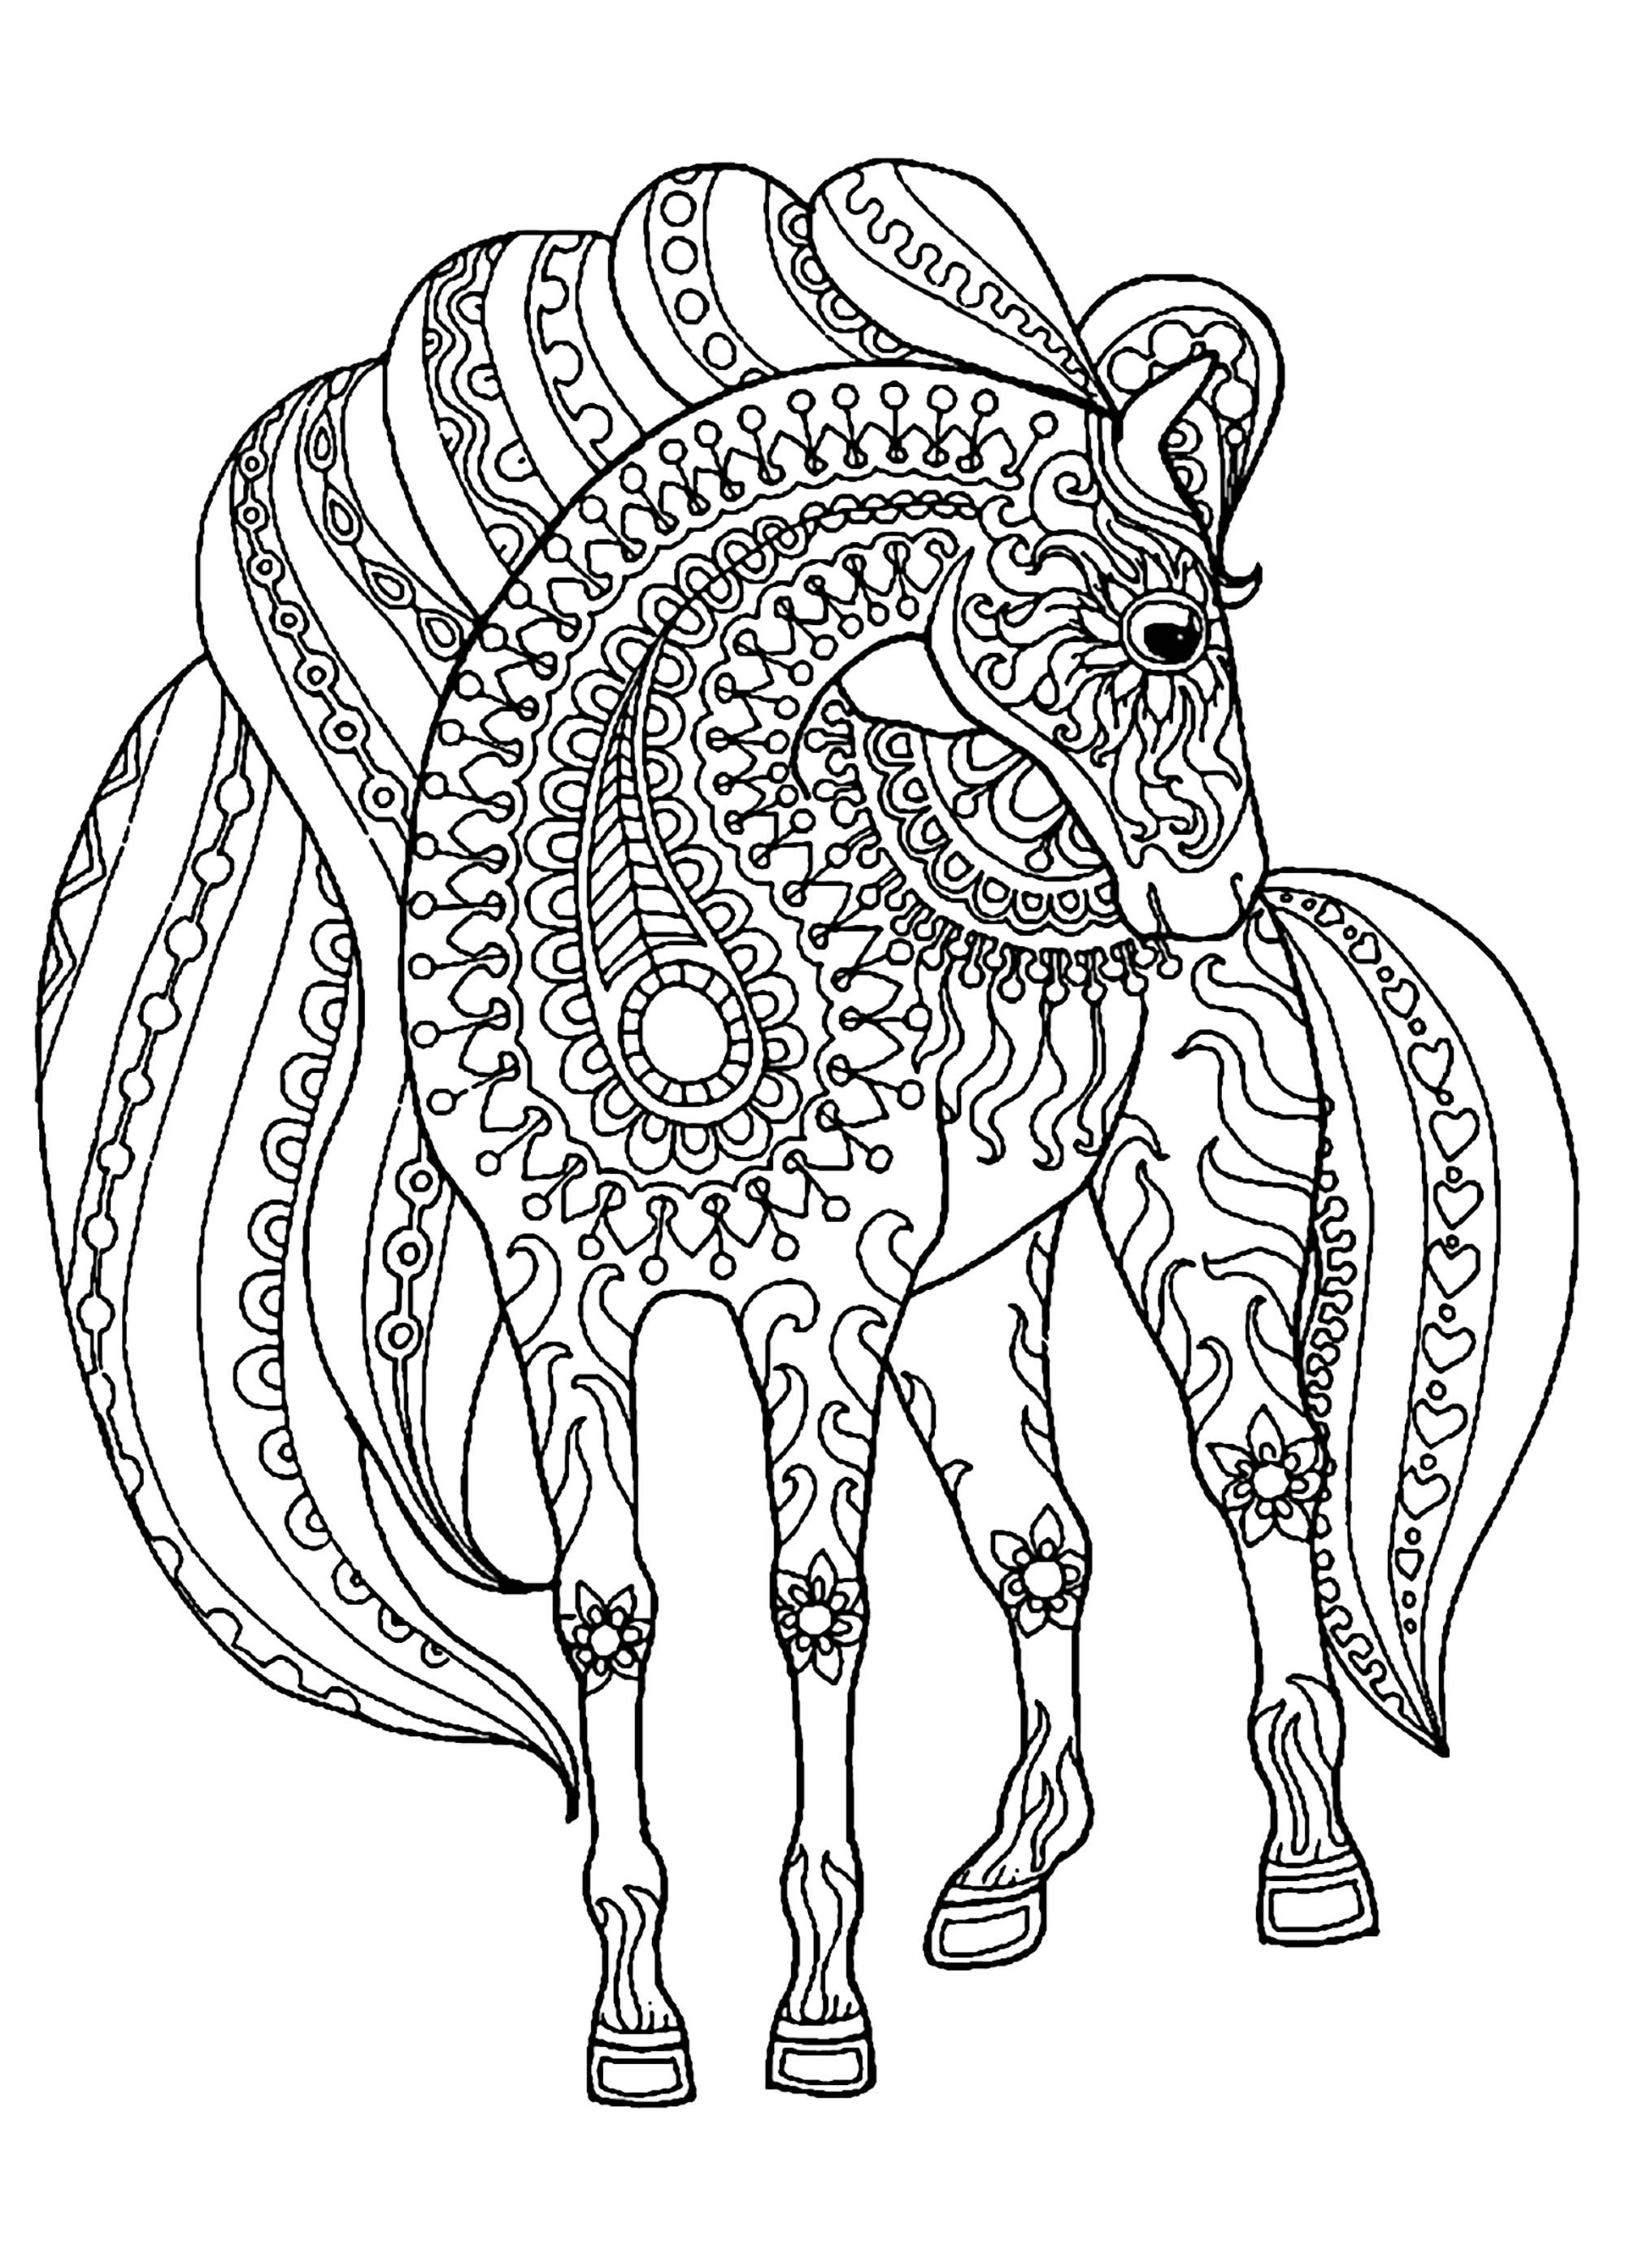 Coloring Pages For Adults Horses
 Horse simple zentangle patterns Horses Adult Coloring Pages